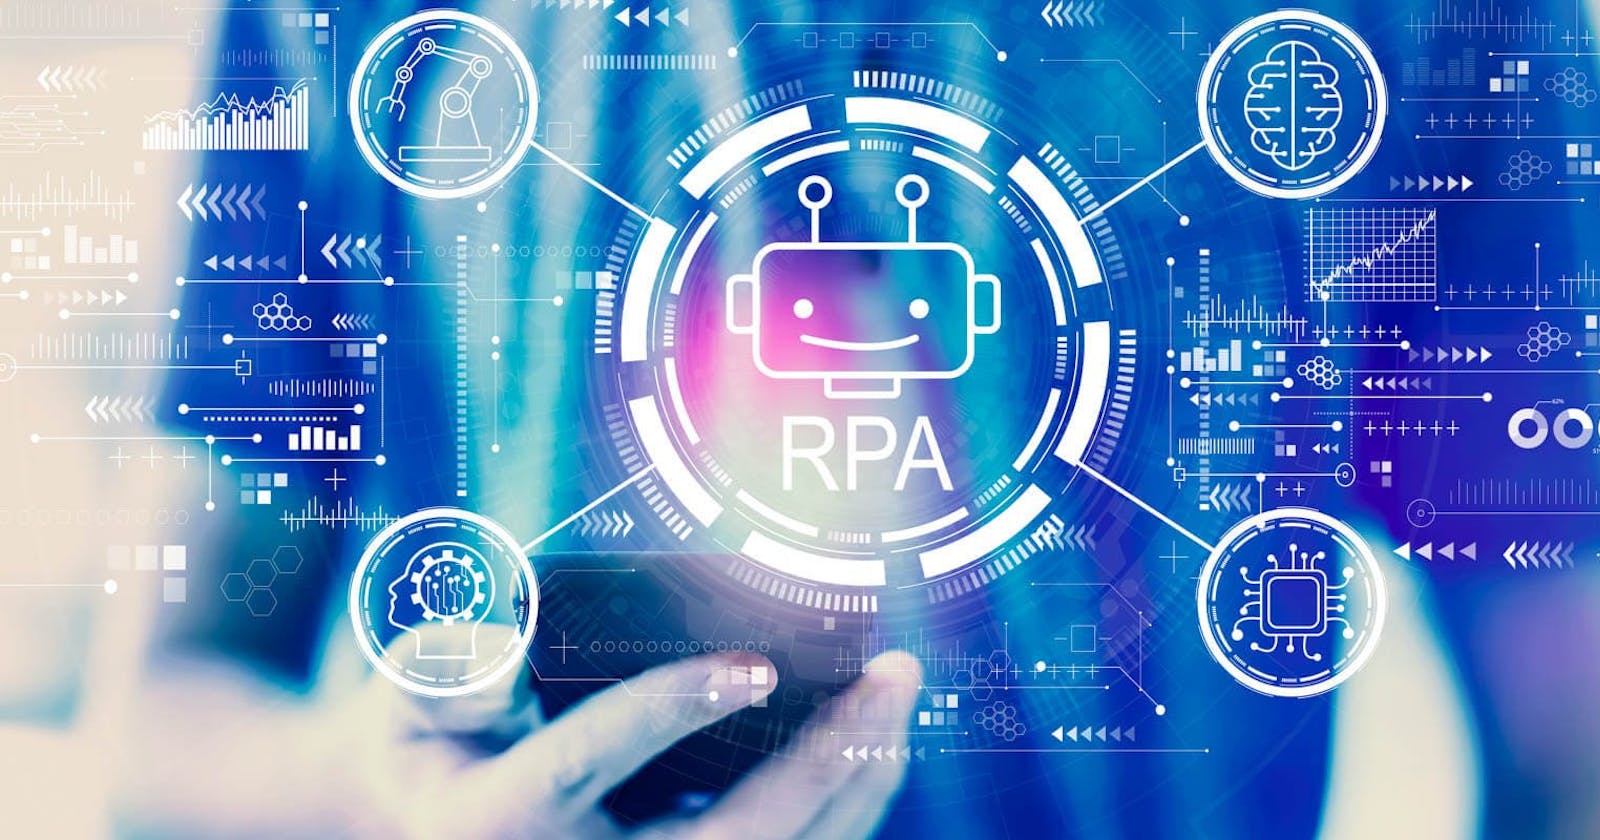 Robotic Process Automation with UiPath